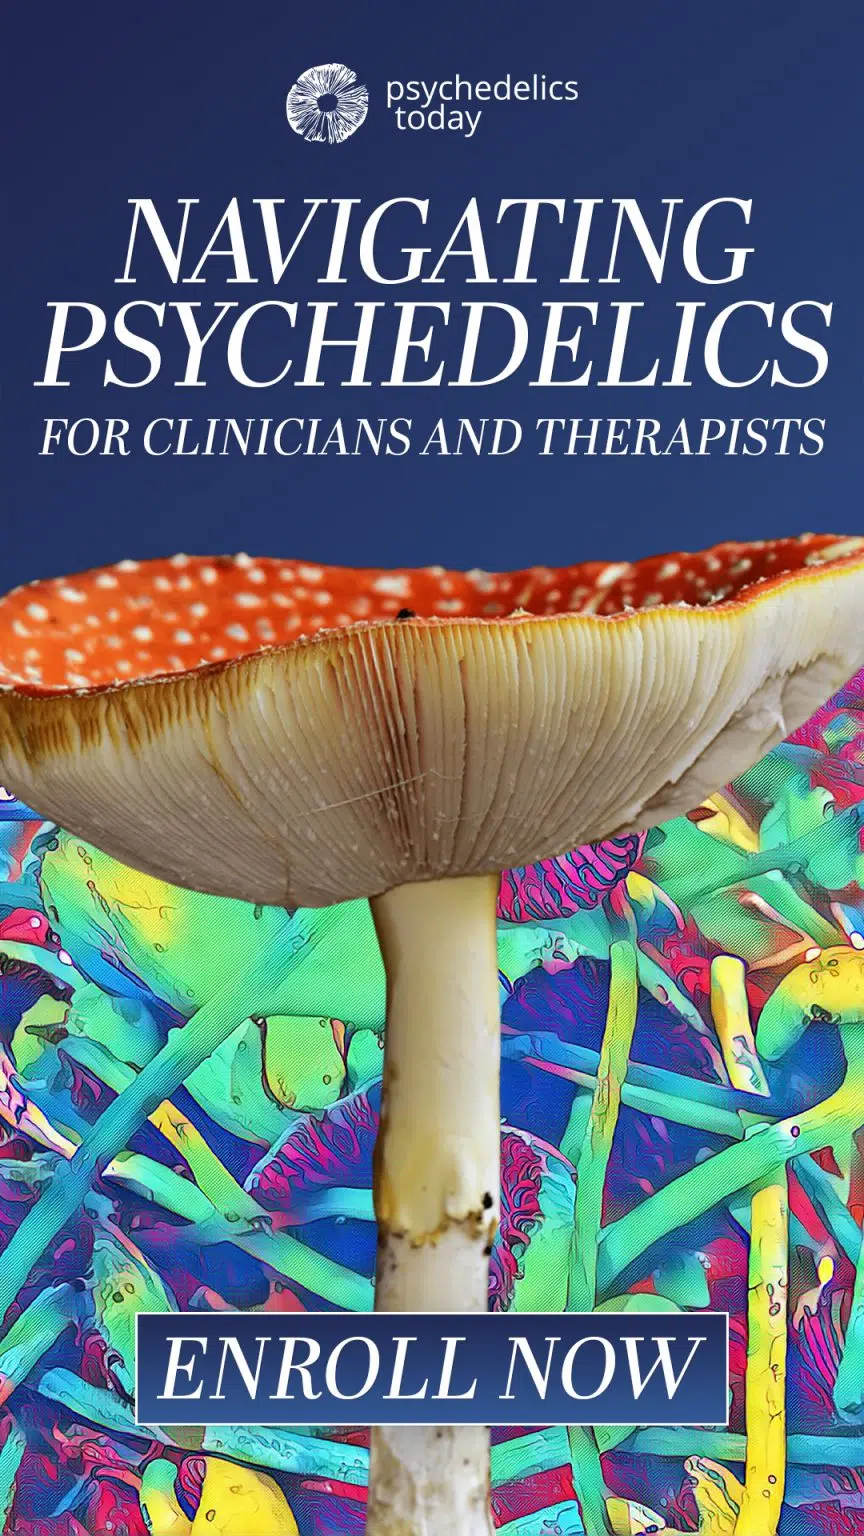 psychedelic trip therapist